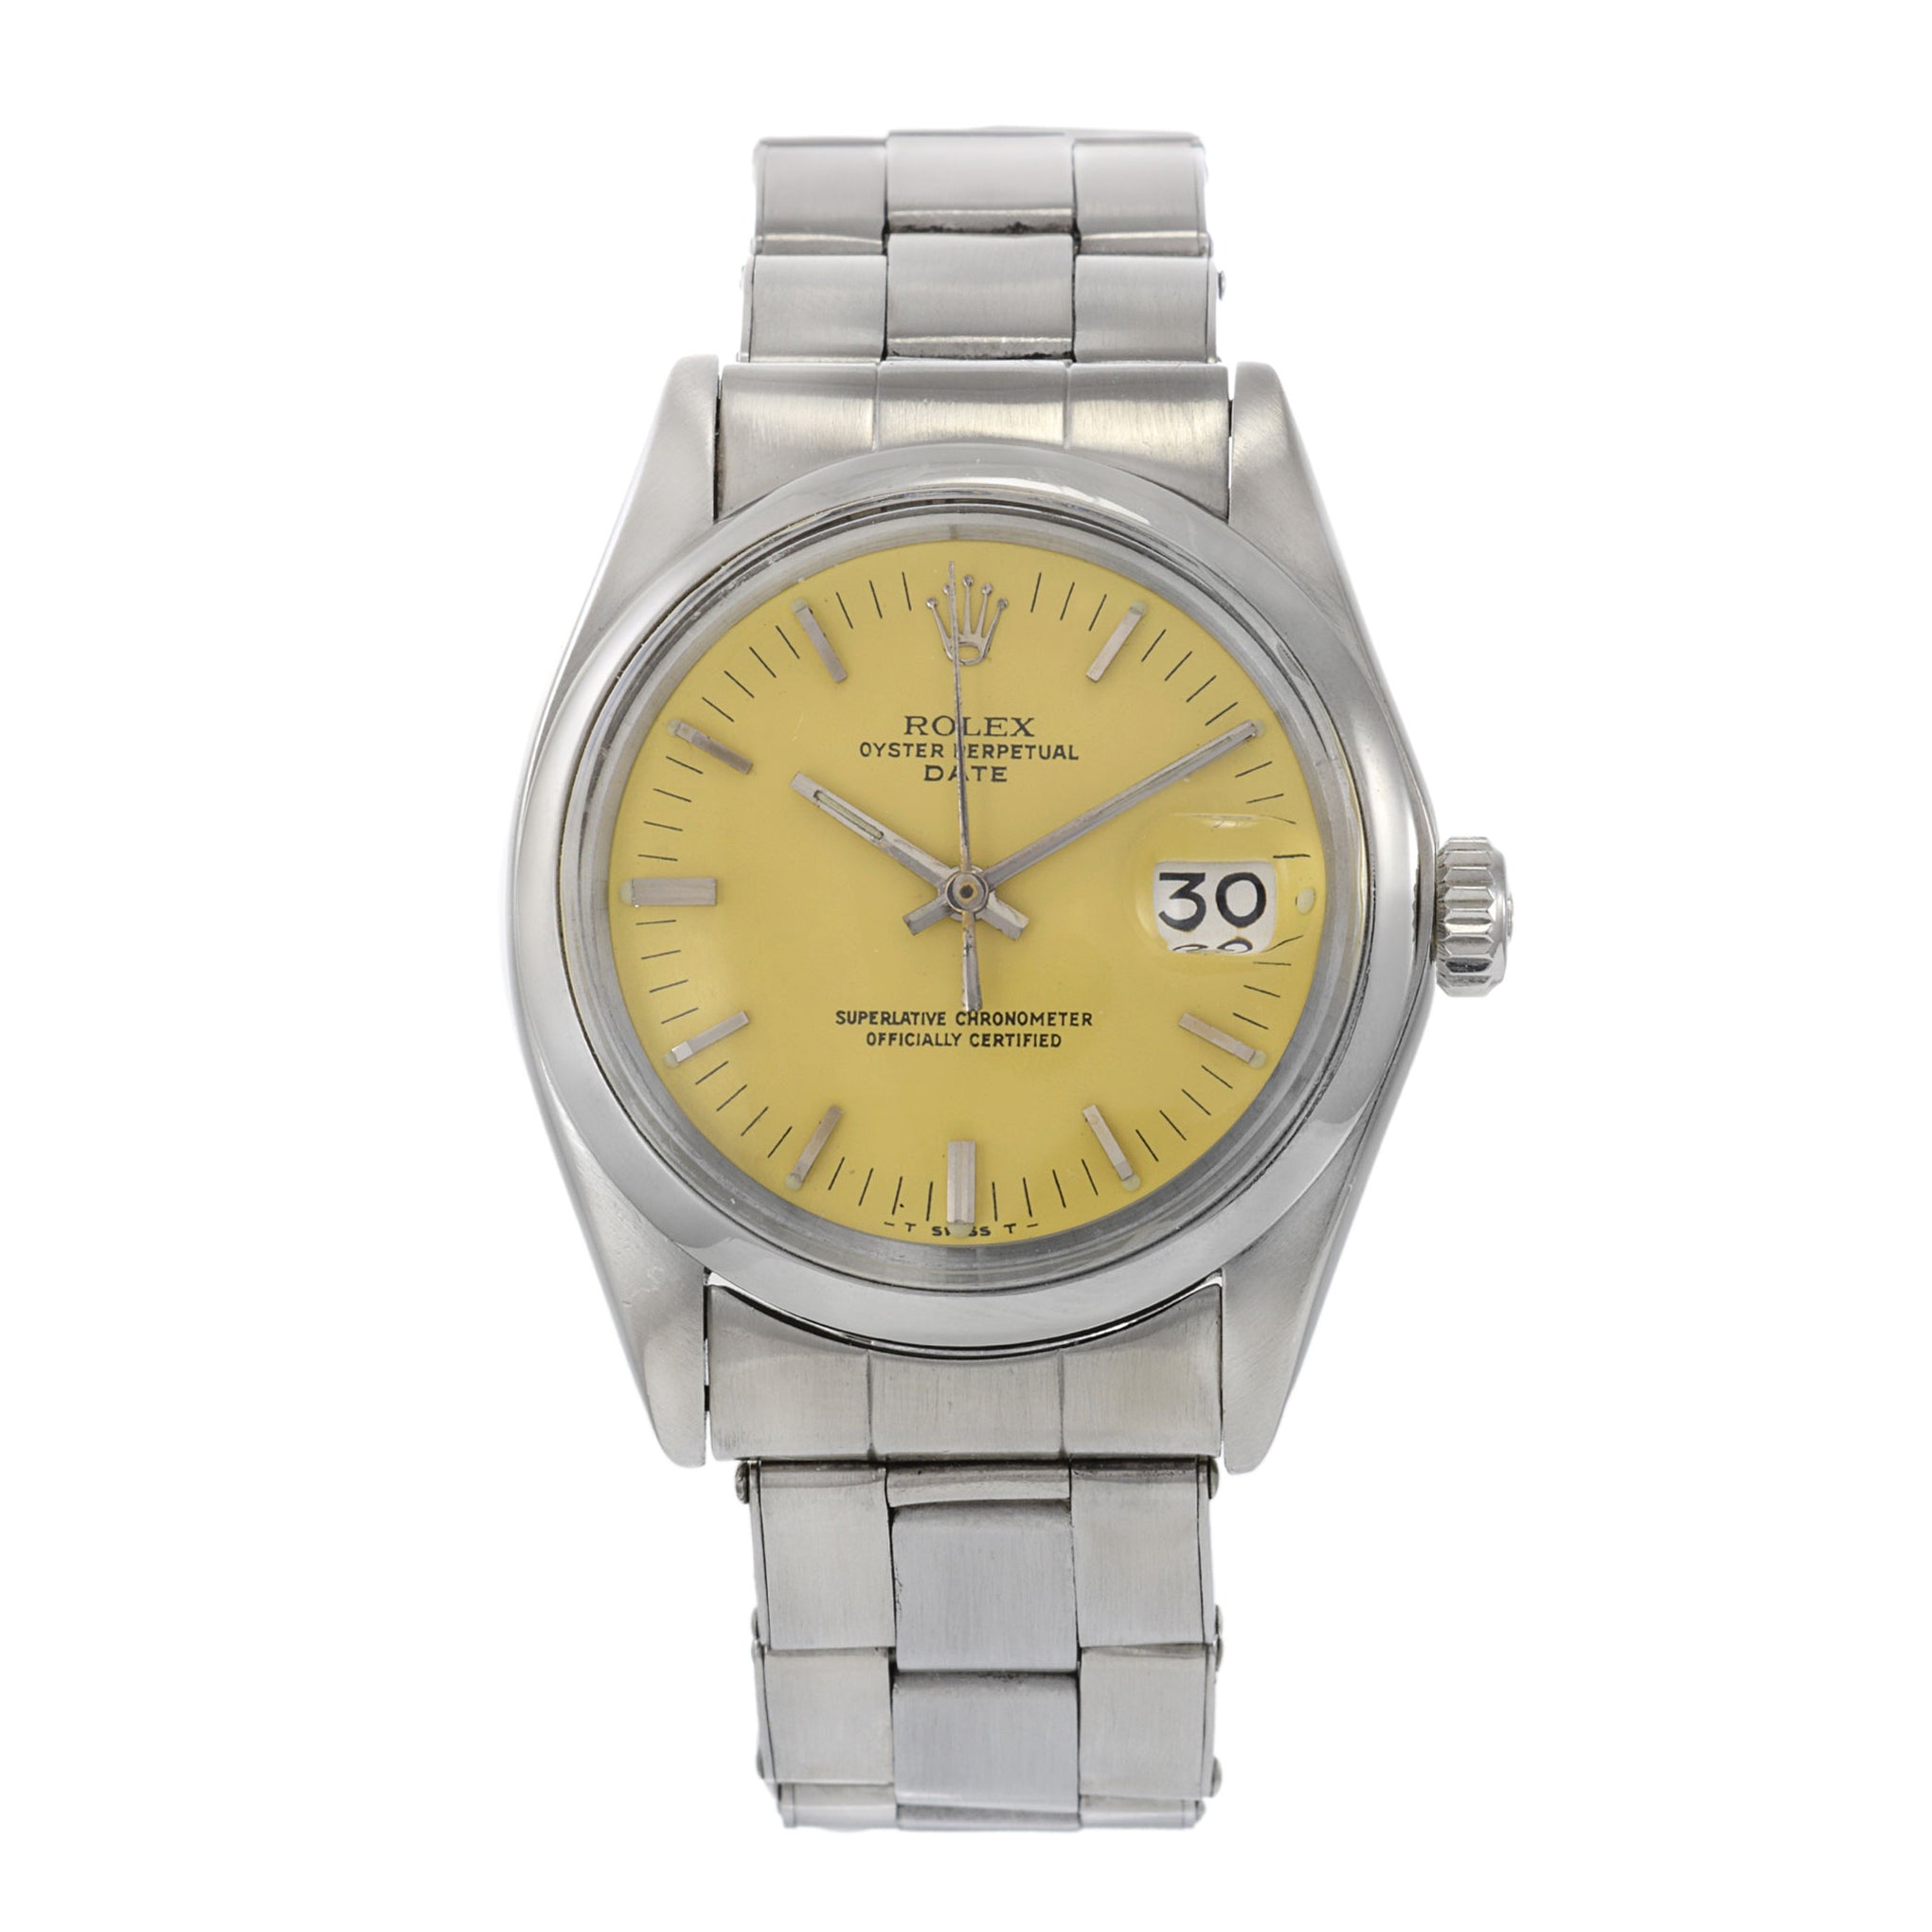 Vintage 1973 Rolex Date Reference 1500 Custom Yellow Dial Automatic Watch